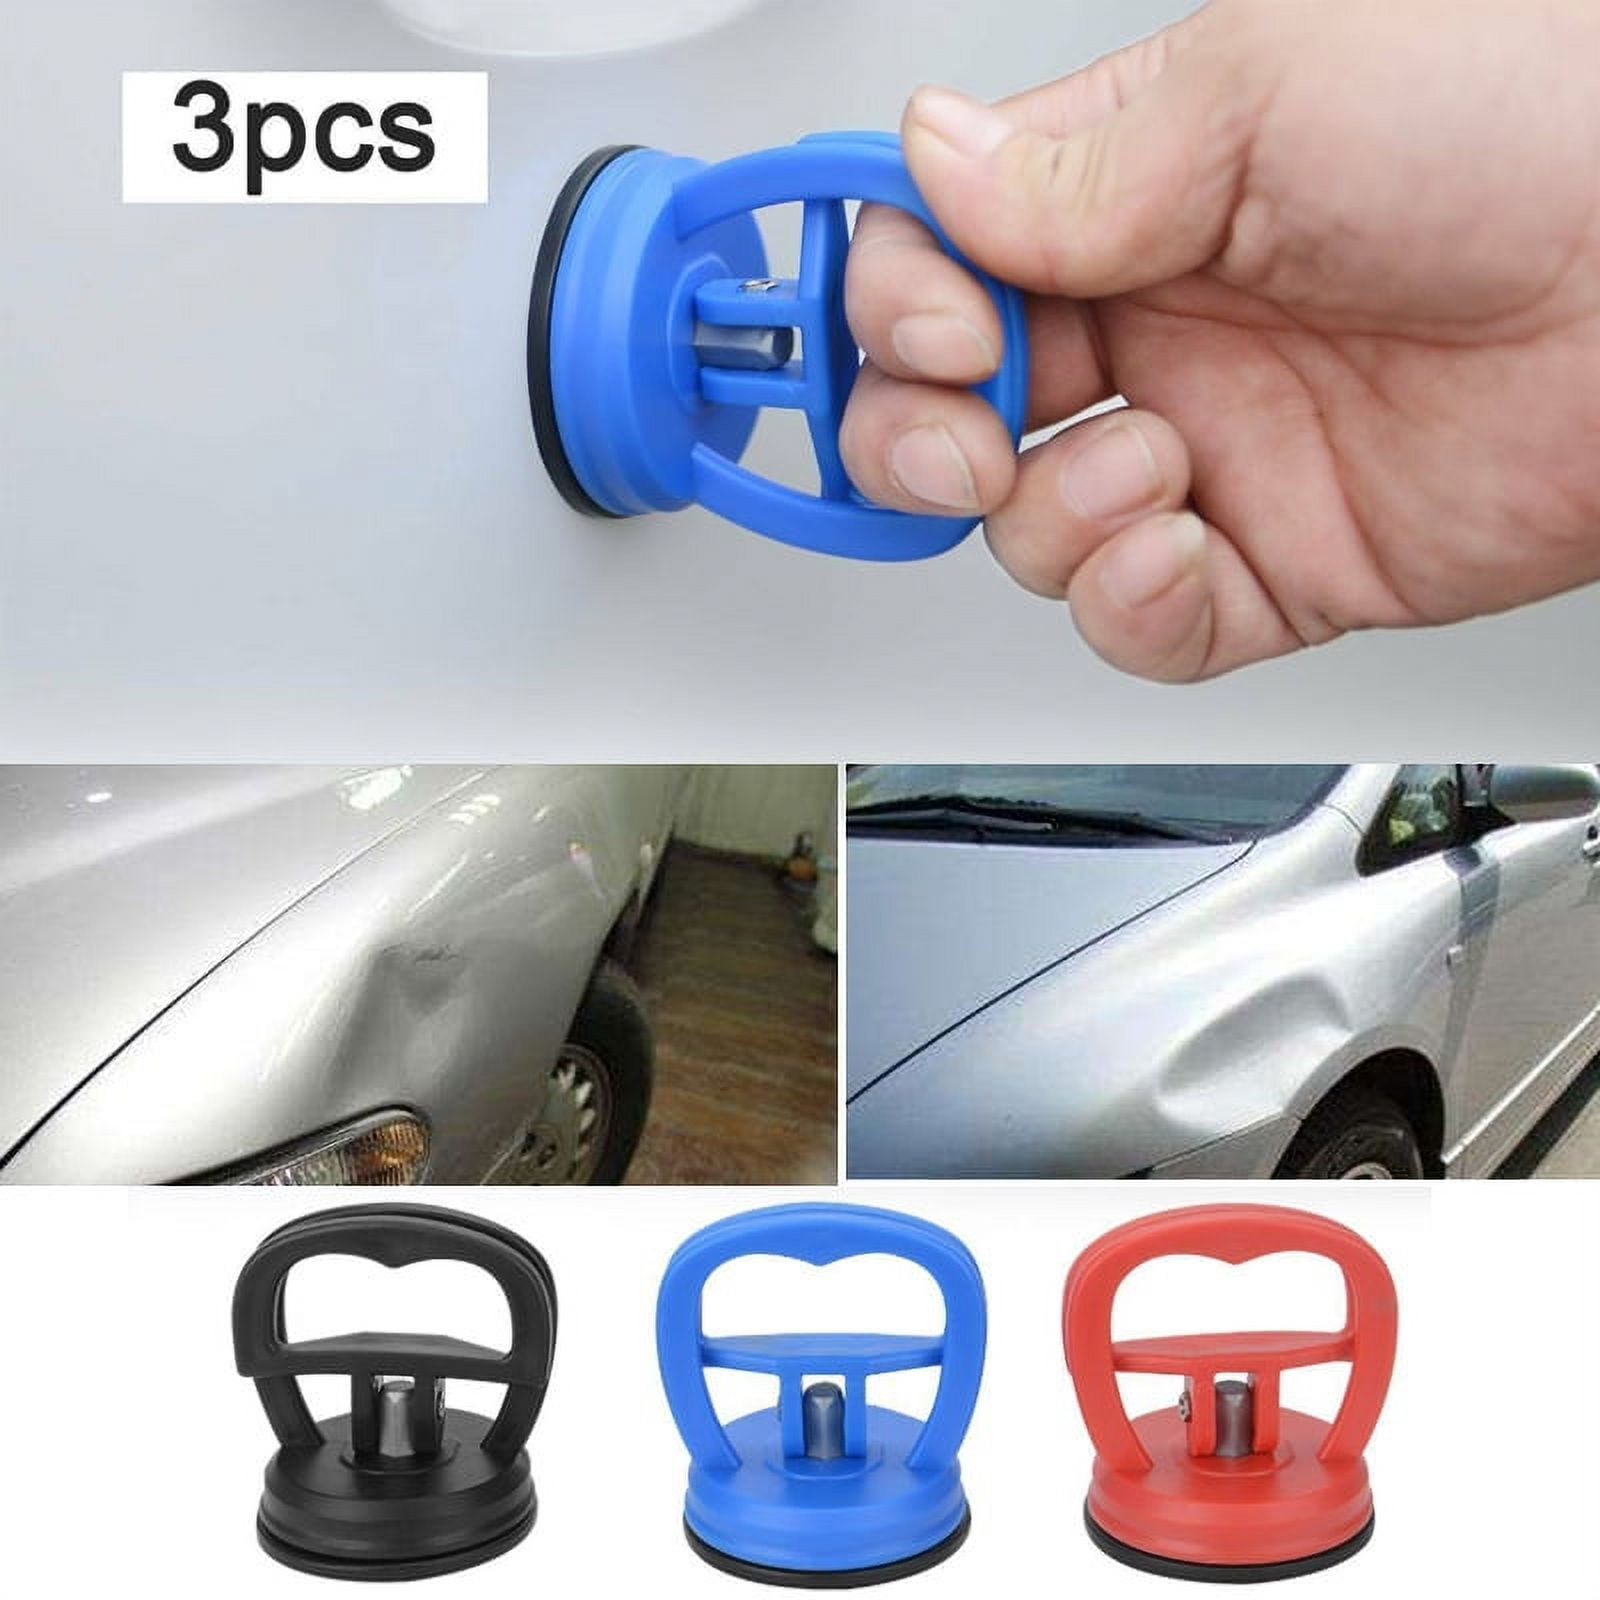 3pcs Mini Suction Cup Dent Puller Handle Lifter Car Dent Puller Remover for Car  Dent Repair, Glass,Tiles, Mirror, Granite Lifting and Objects Moving, by  Stuffygreenus (Dia:2.2in) 